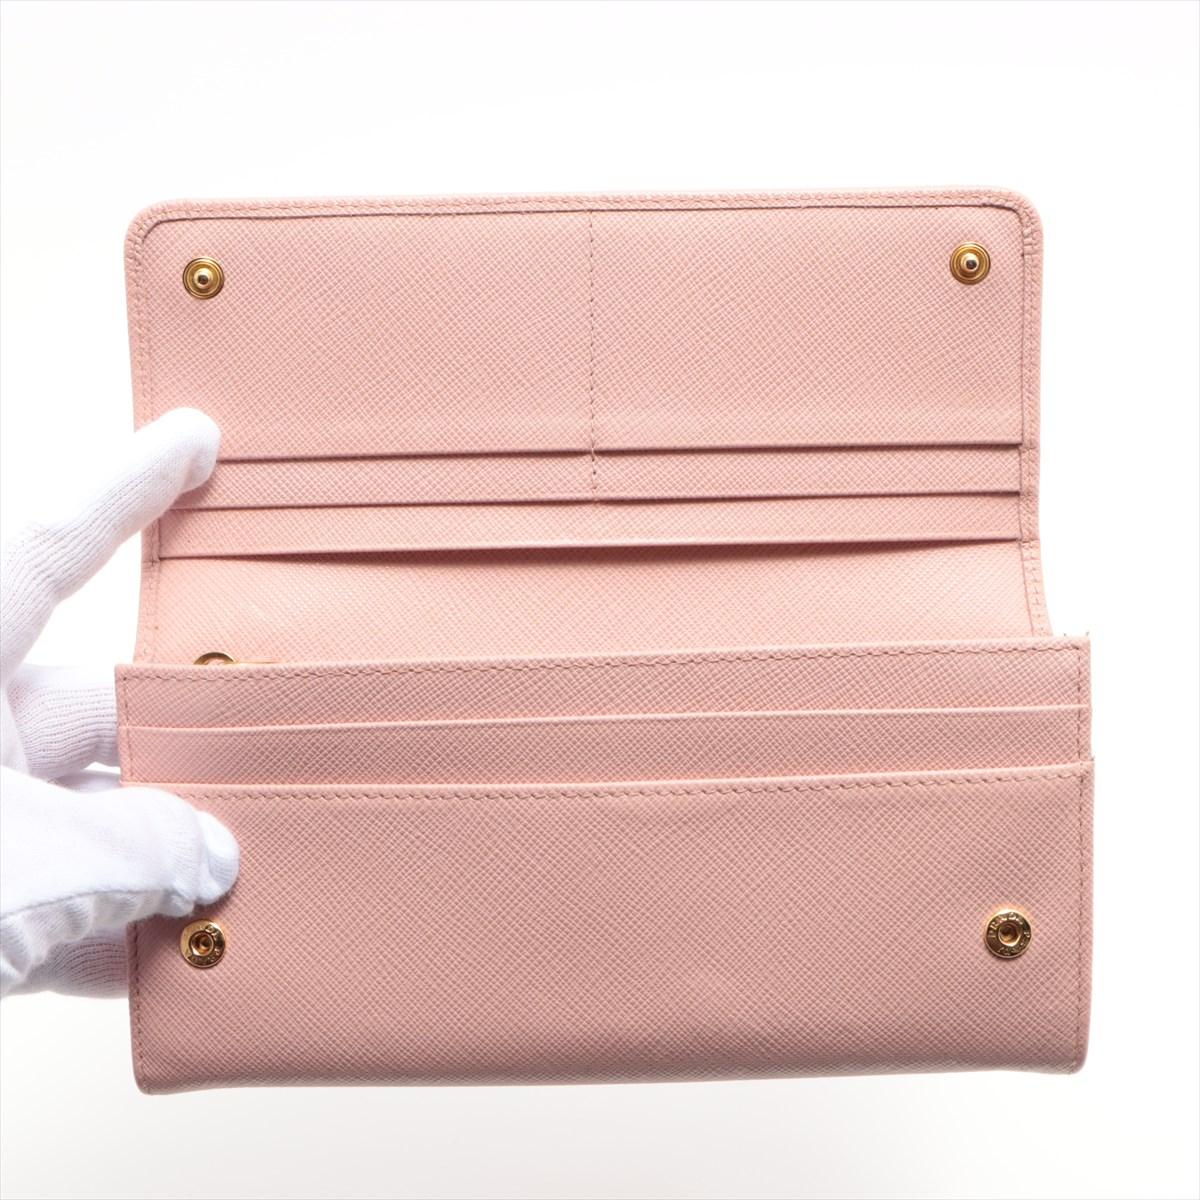 Women's Prada Ribbon Saffiano Leather Wallet Pink For Sale